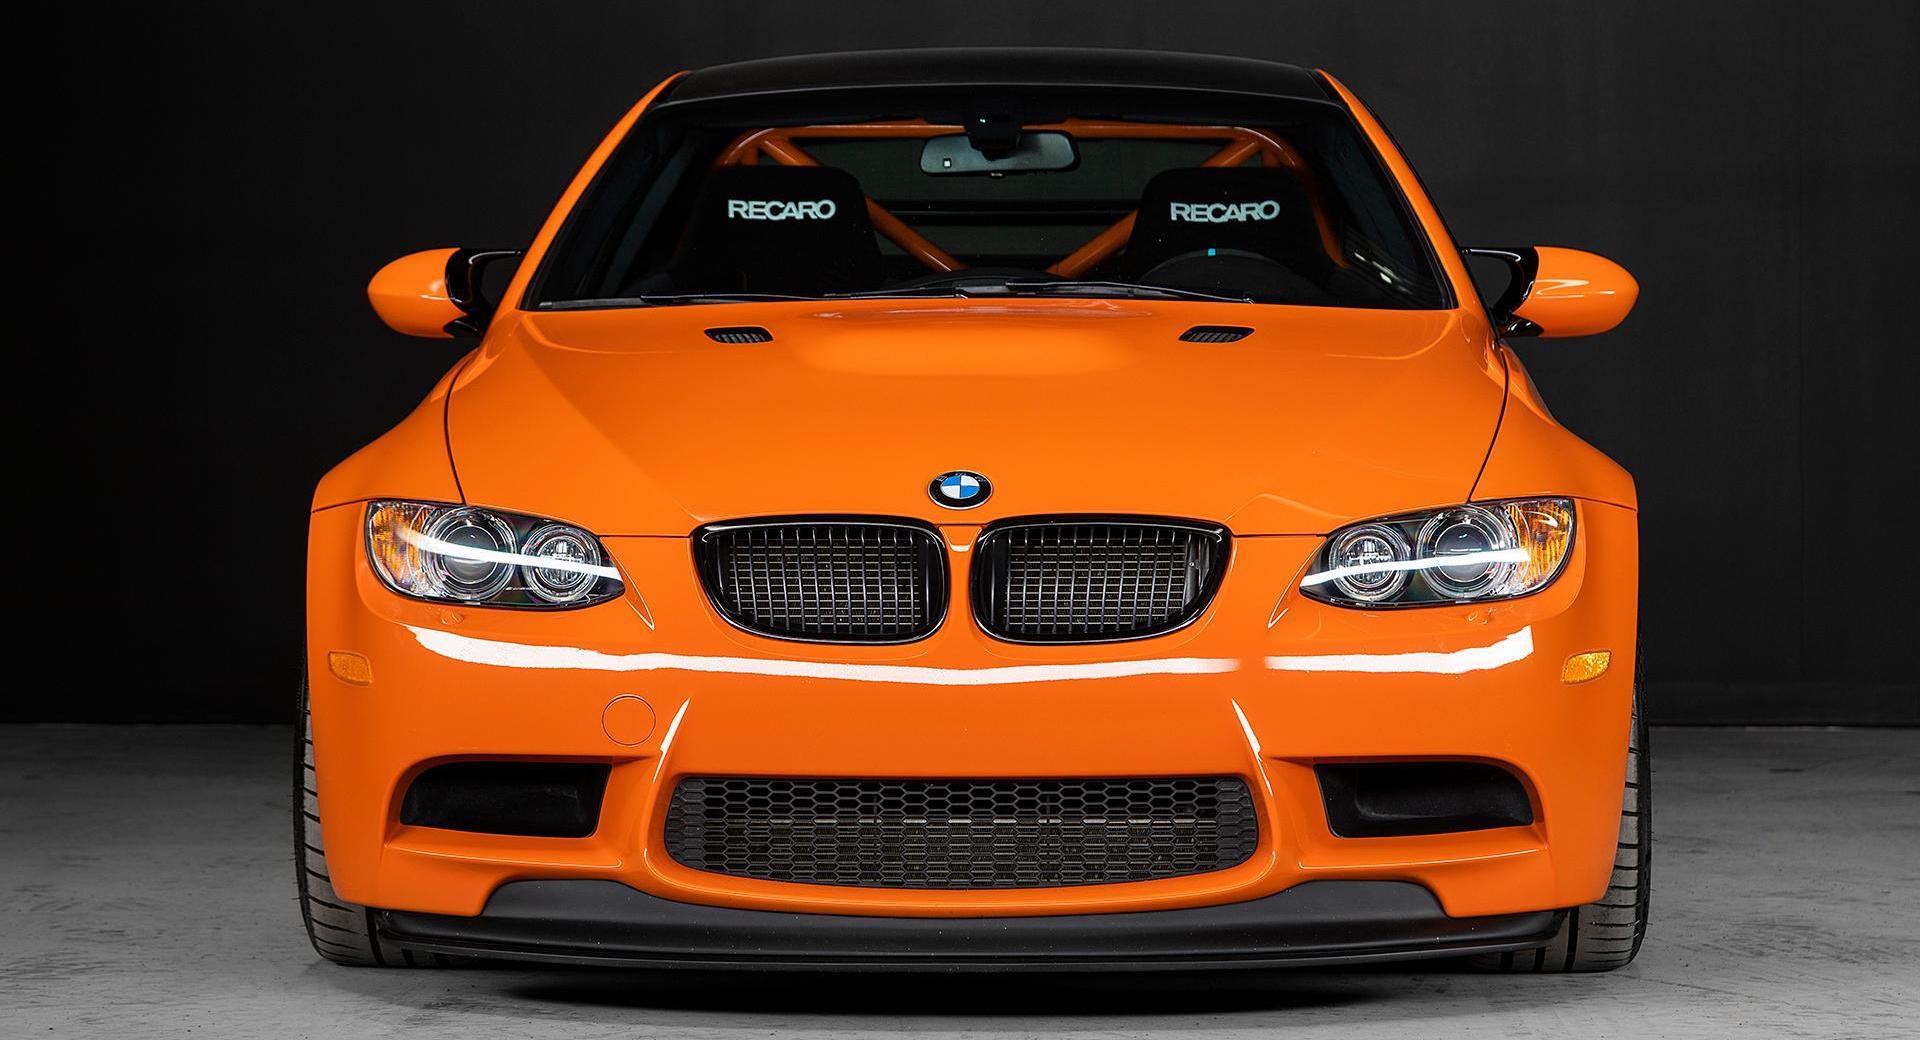 North America Didn't Get The Incredible E92 BMW M3 GTS, But You